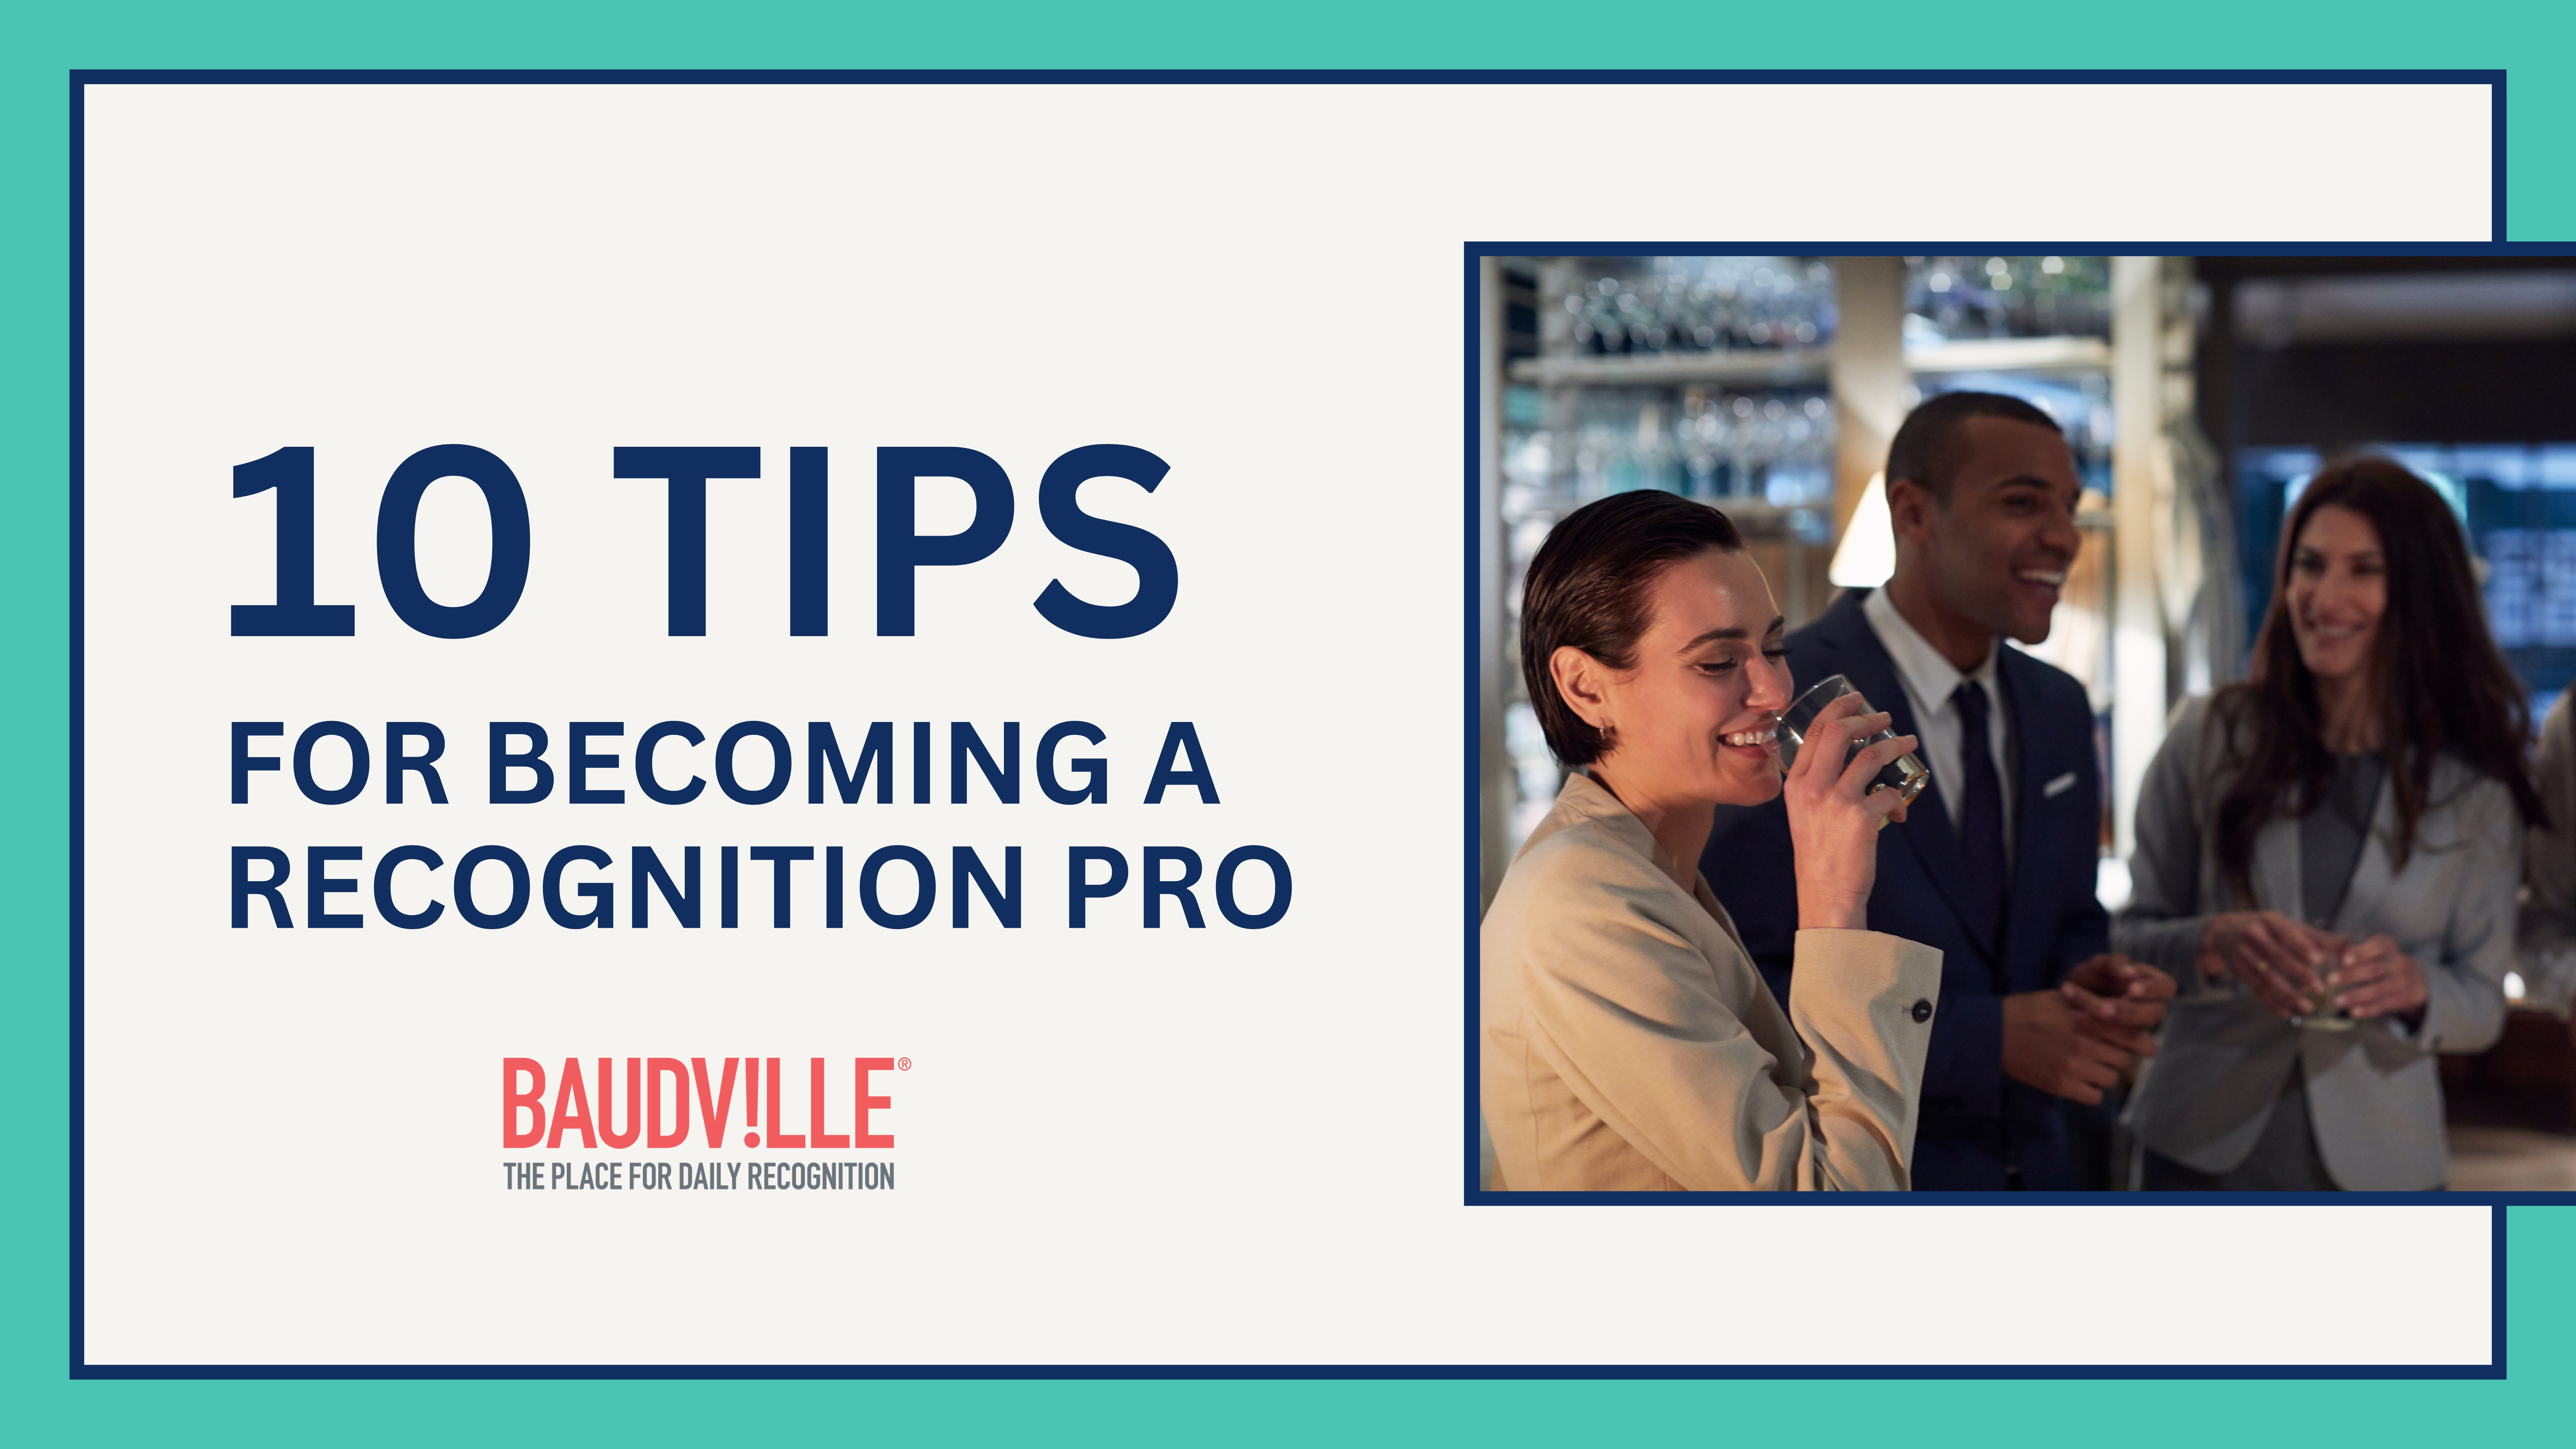 10 Tips for Becoming a Recognition Pro